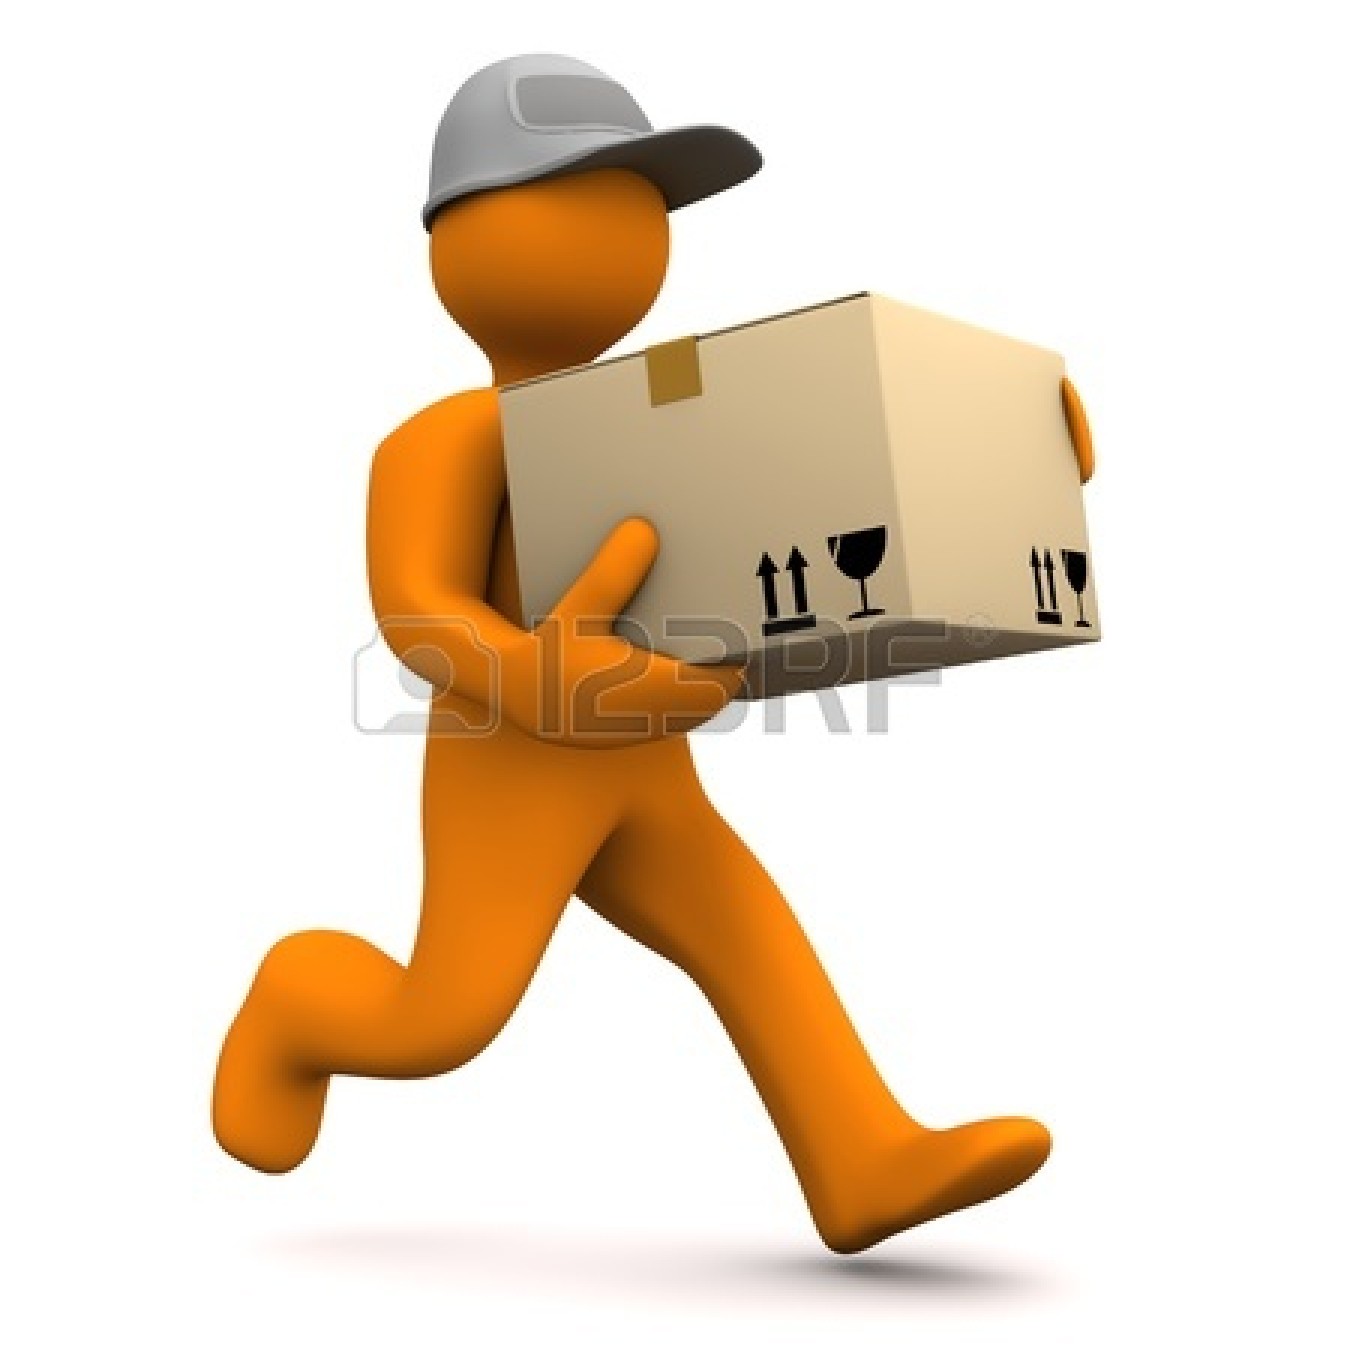 express delivery clipart - photo #38